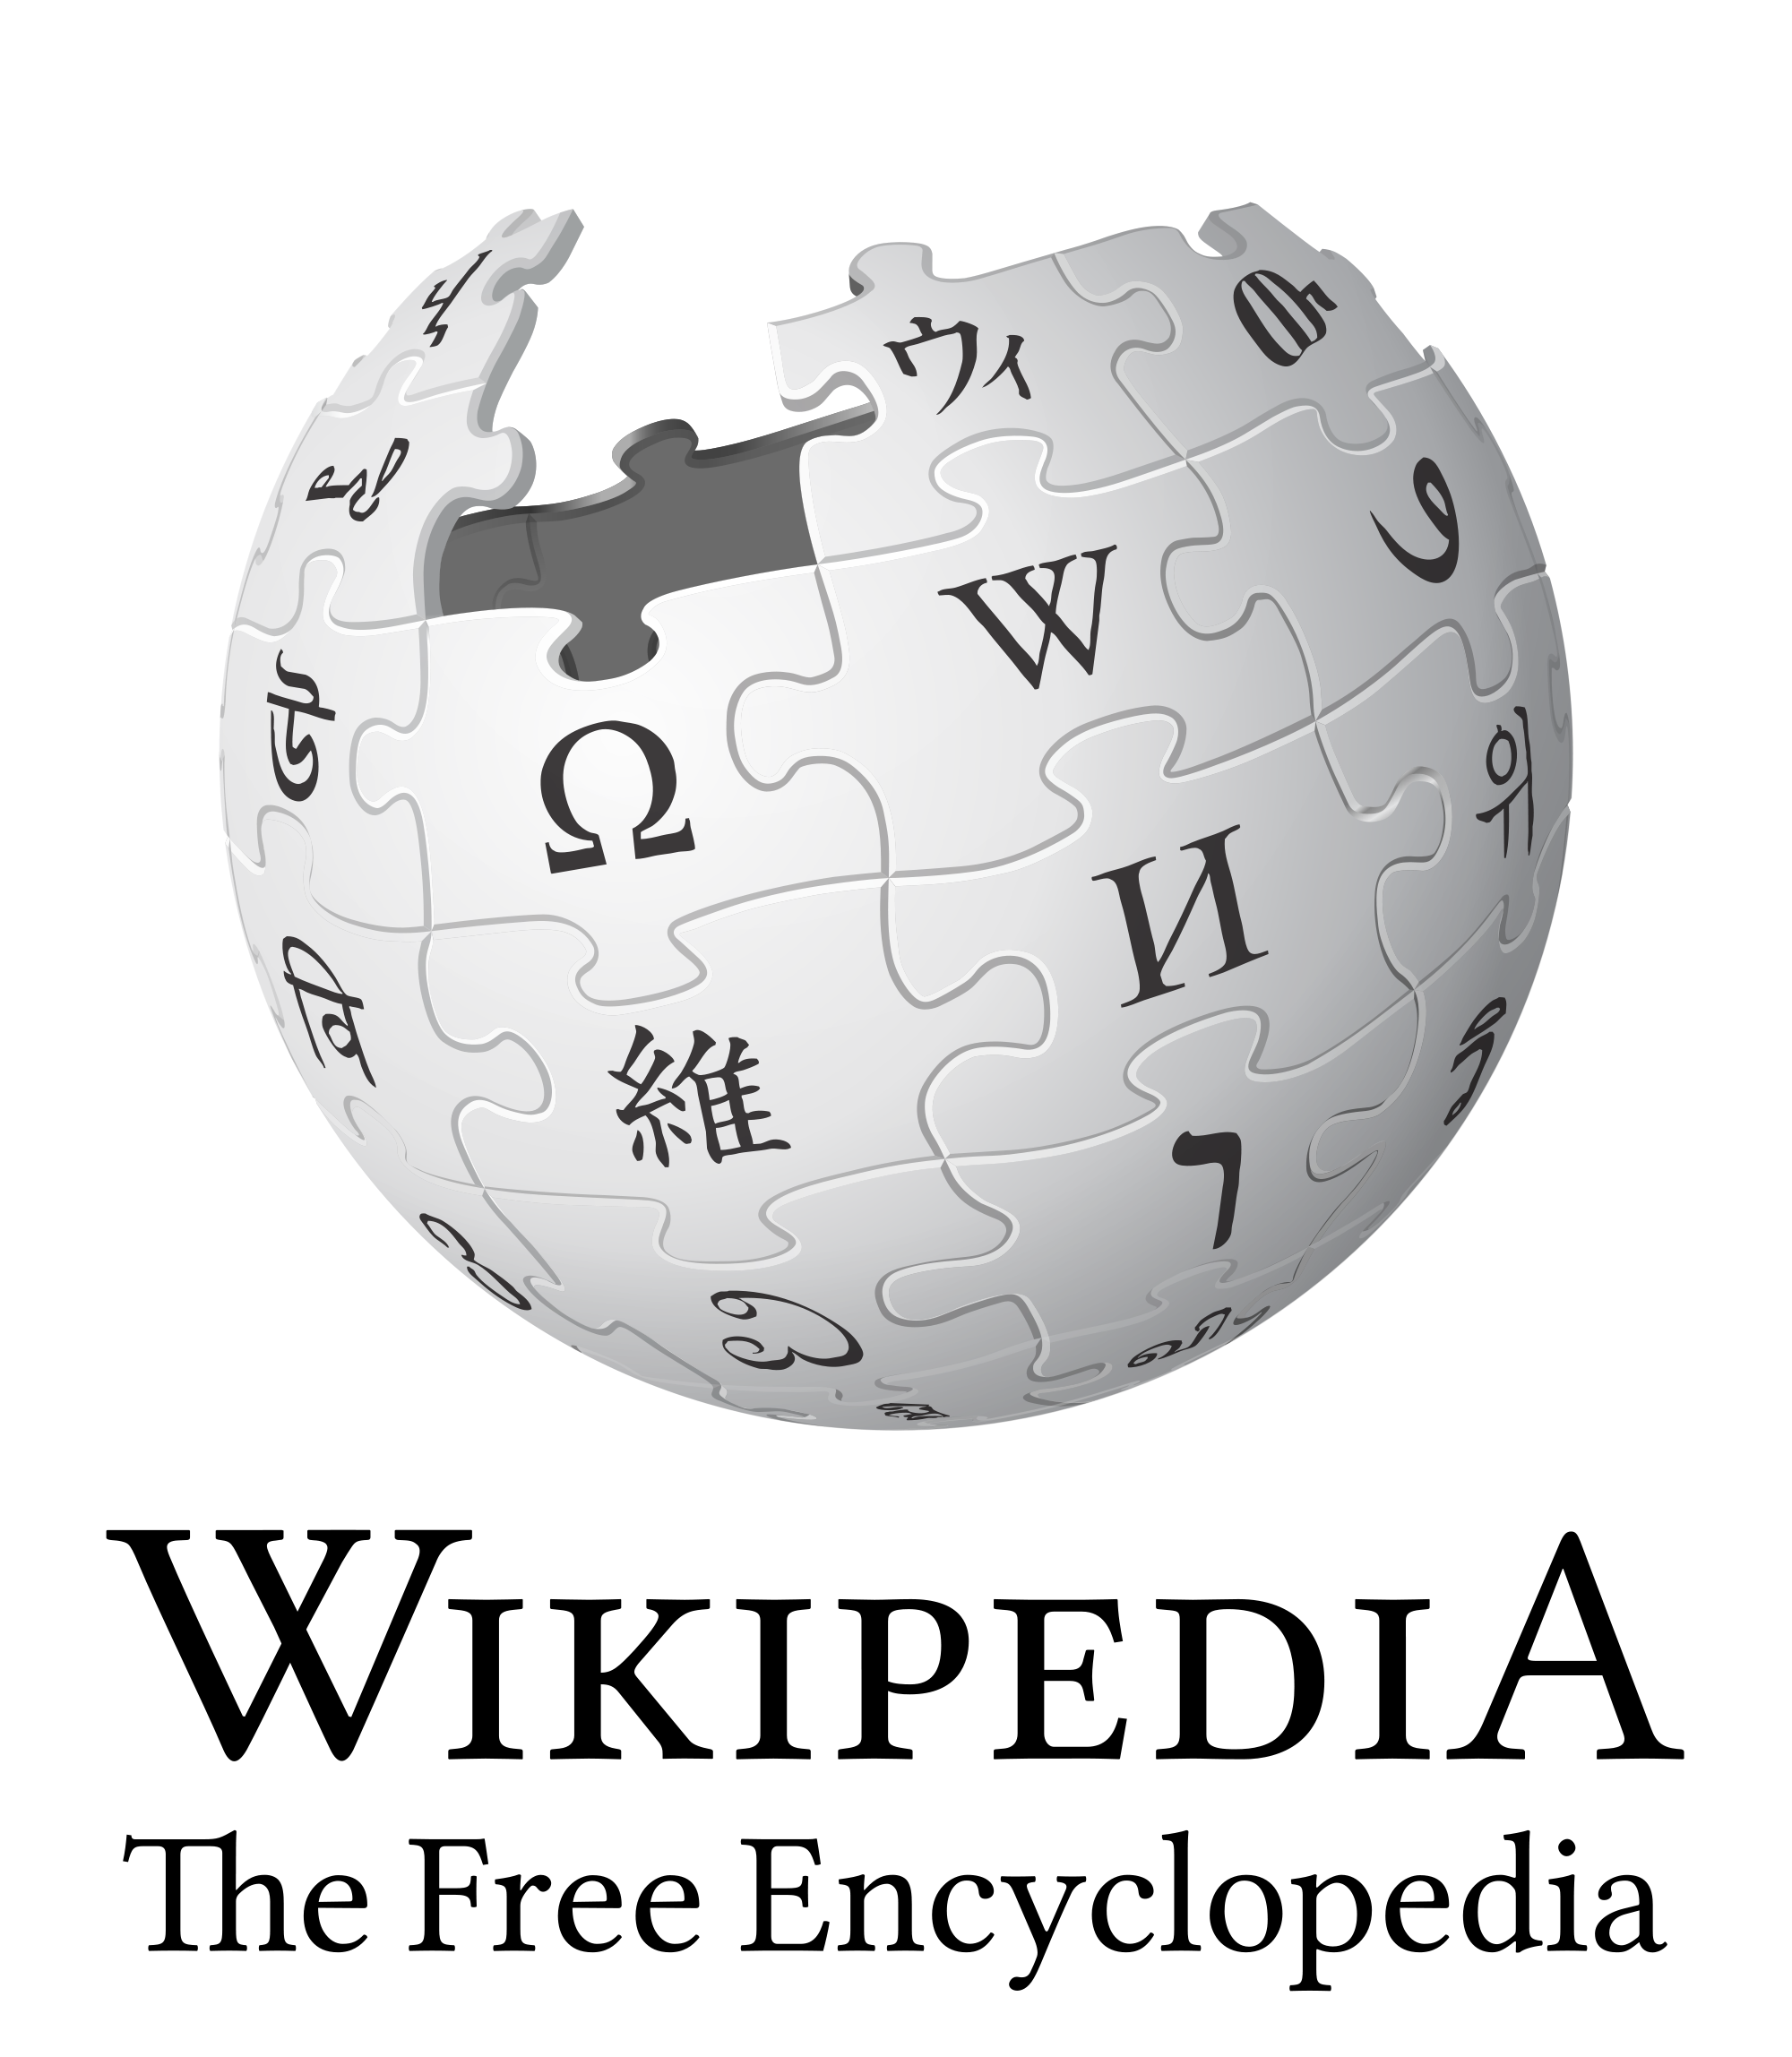 Wikipedia writing service get your wiki